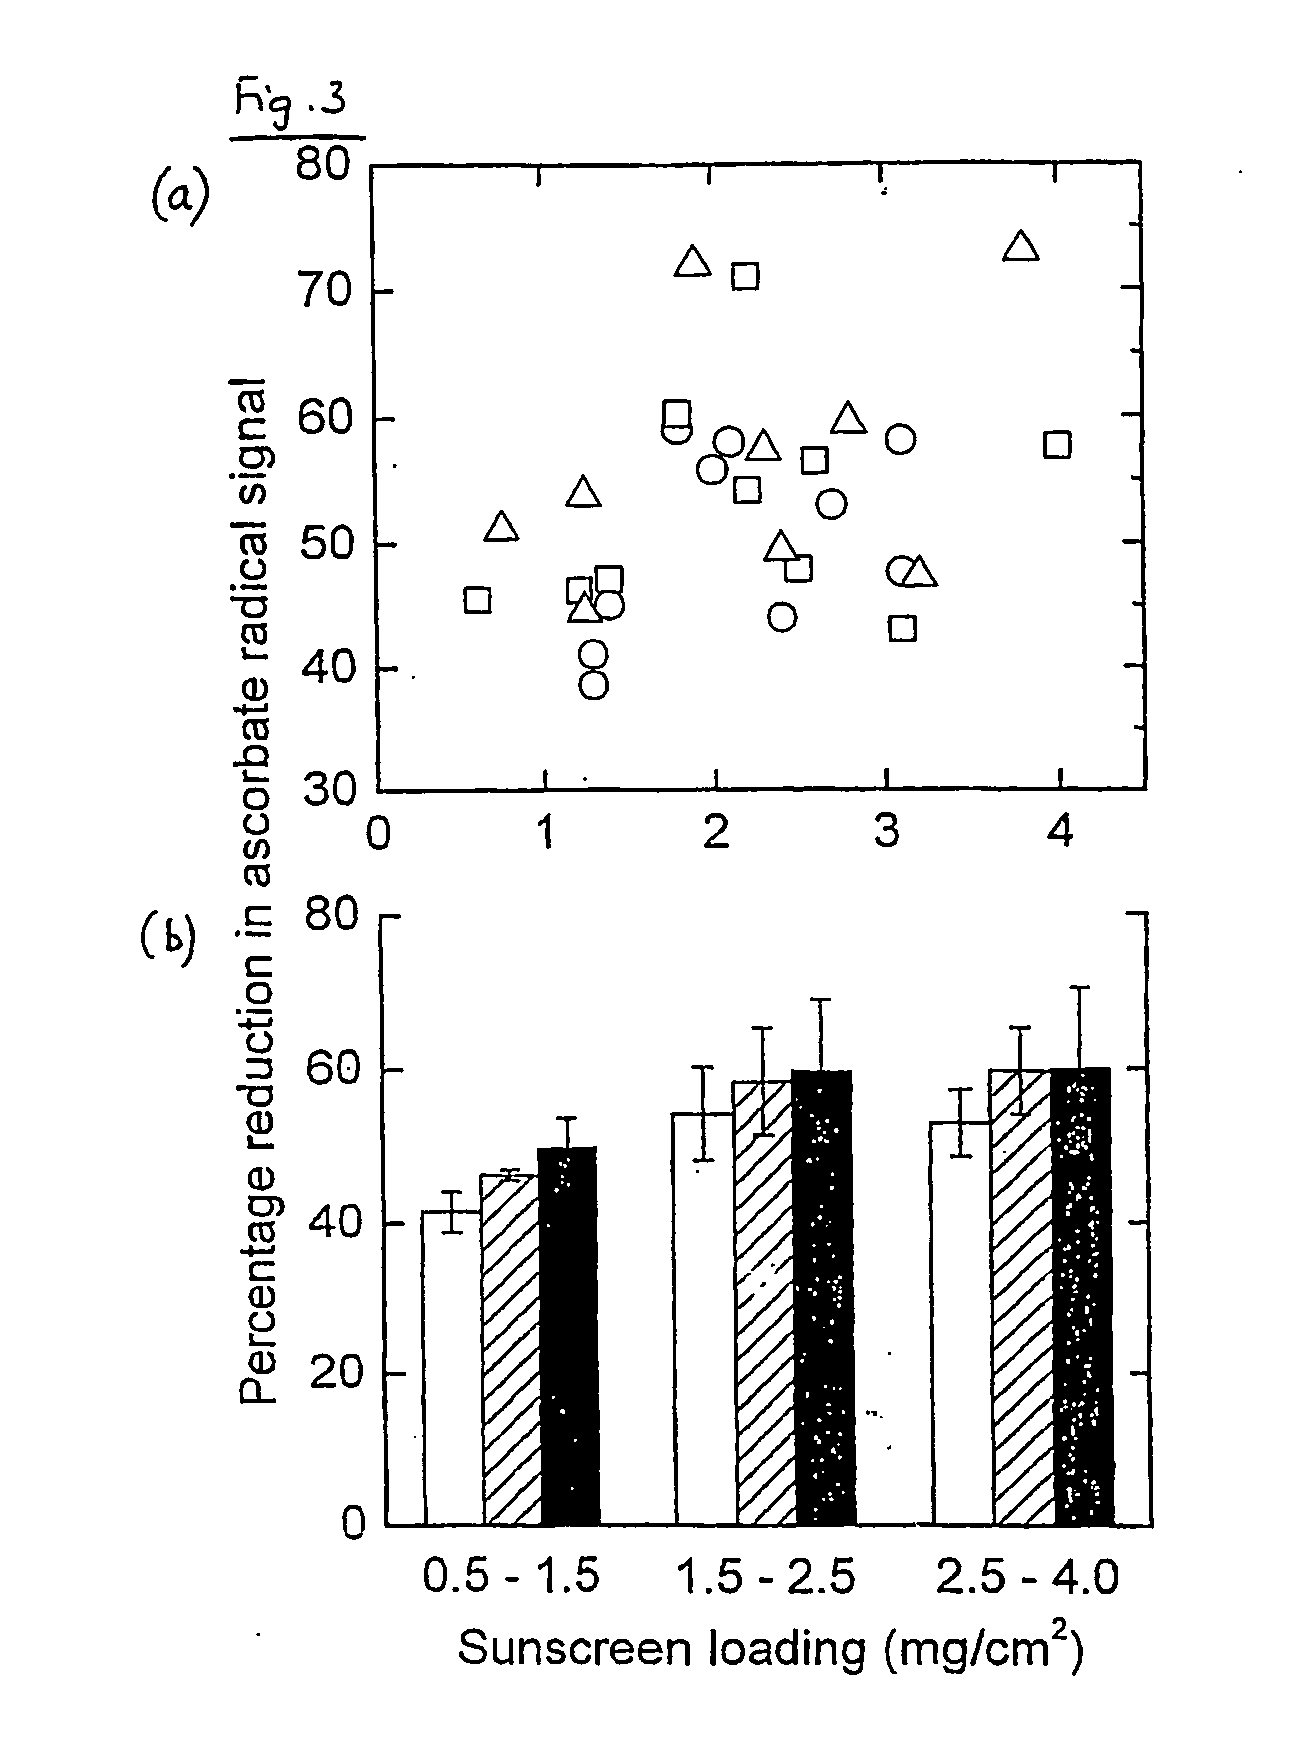 Method and apparatus for determining effectiveness of sunscreens and other skin preparations in shielding human skin from uva radiation